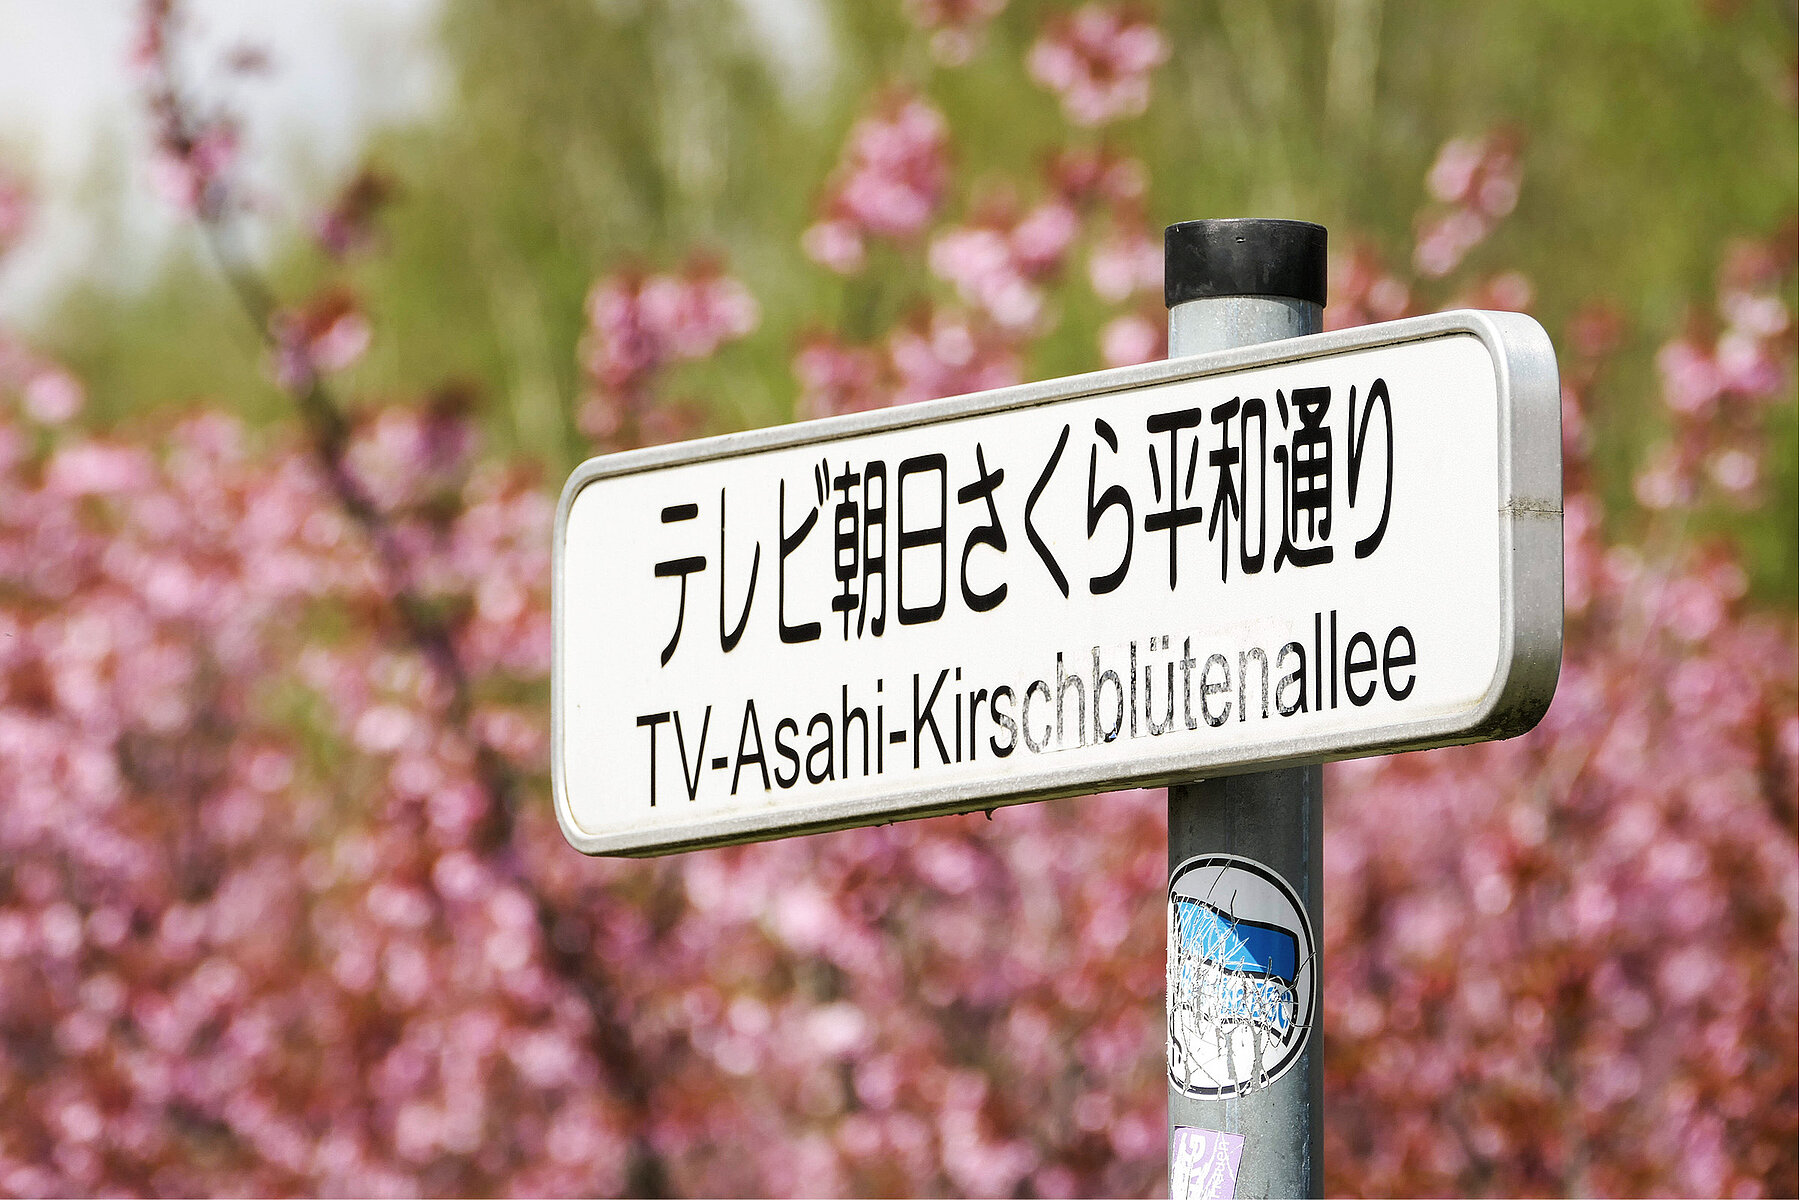 In front of pink flowering cherry tree branches a sign reads in Japanese and German: TV-Akashi-Kirschblütenallee.